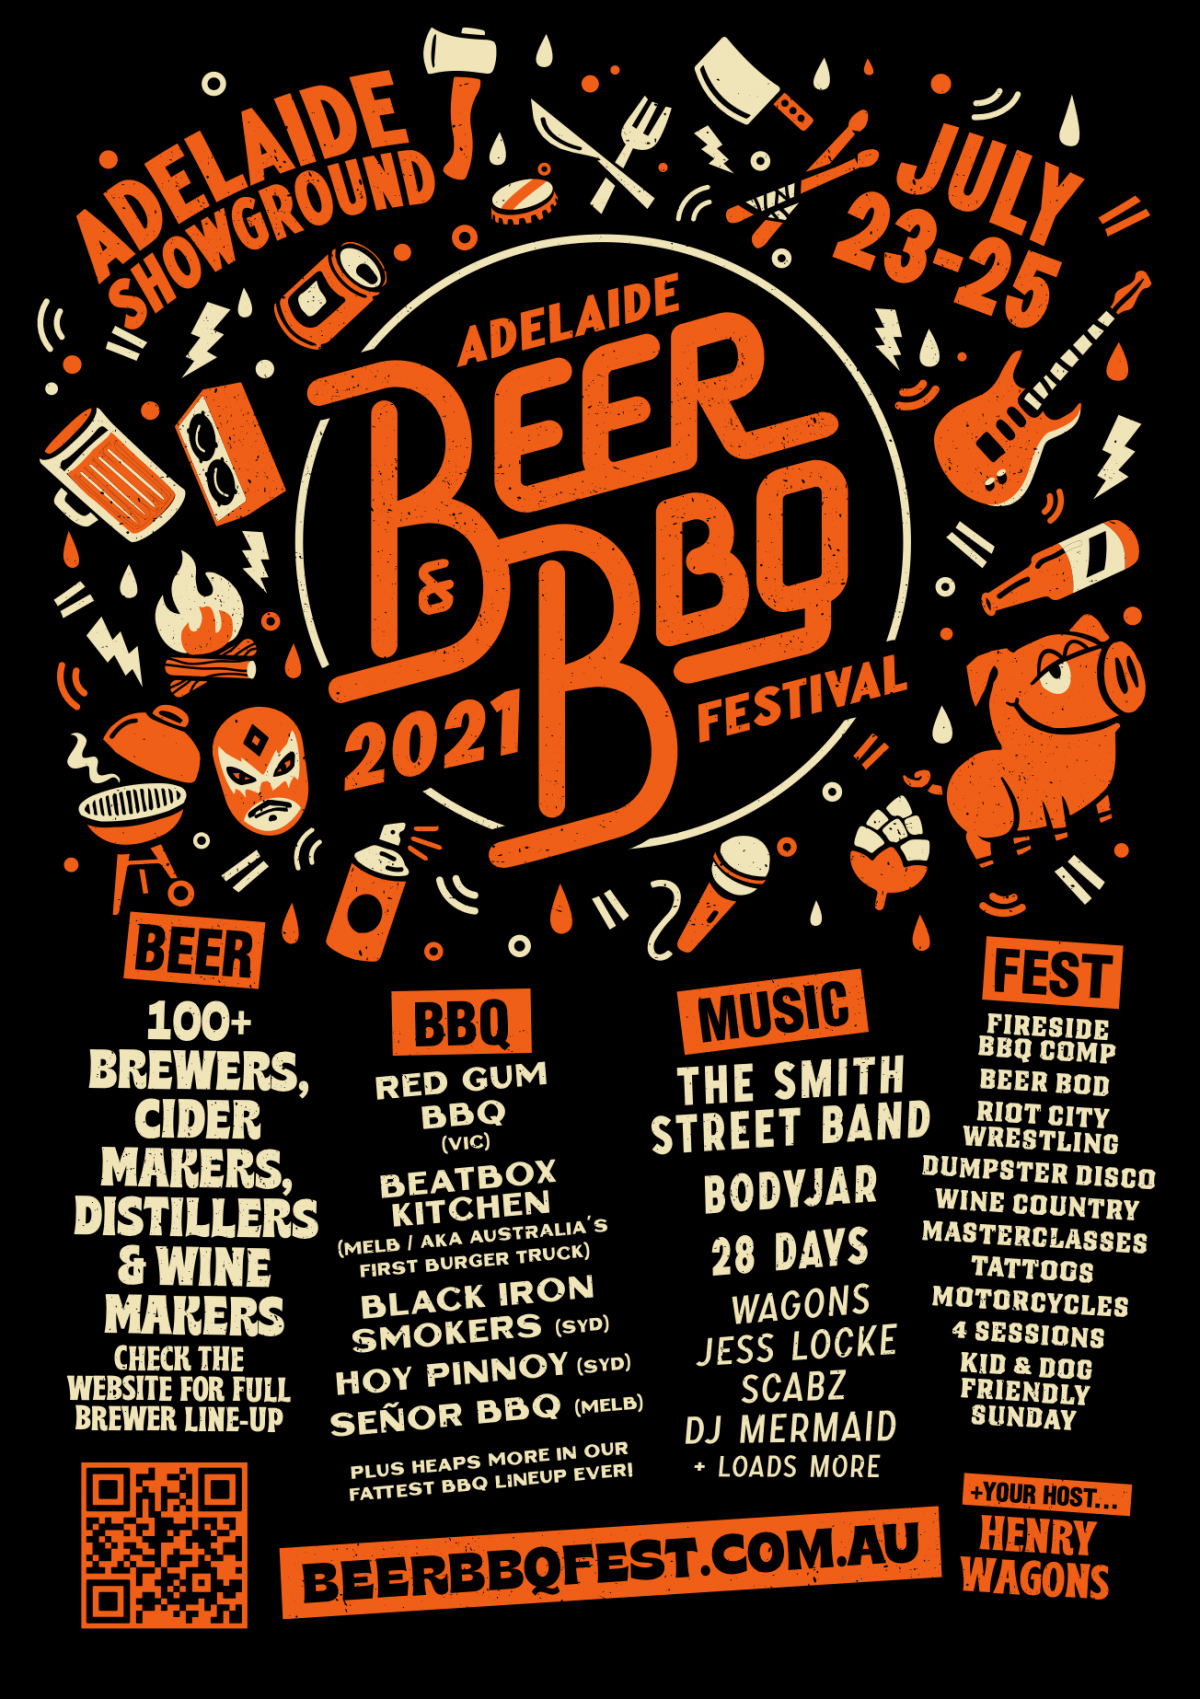 Beer and BBQ Festival 2021